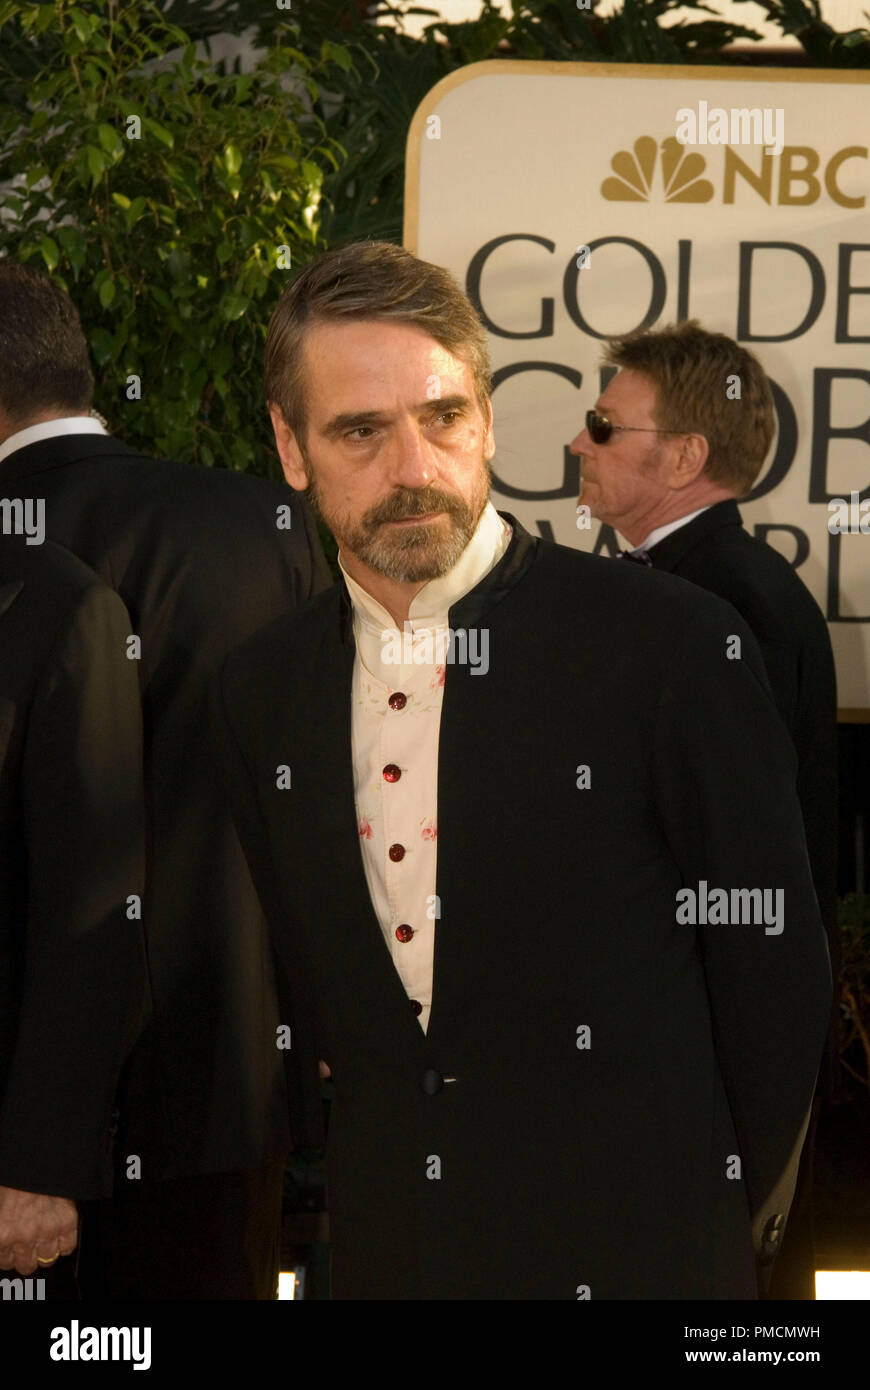 Hollywood Foreign Press Association presents the 2007 'Golden Globe Awards - 64th Annual' (Arrivals) Jeremy Irons 1-15-07 Stock Photo